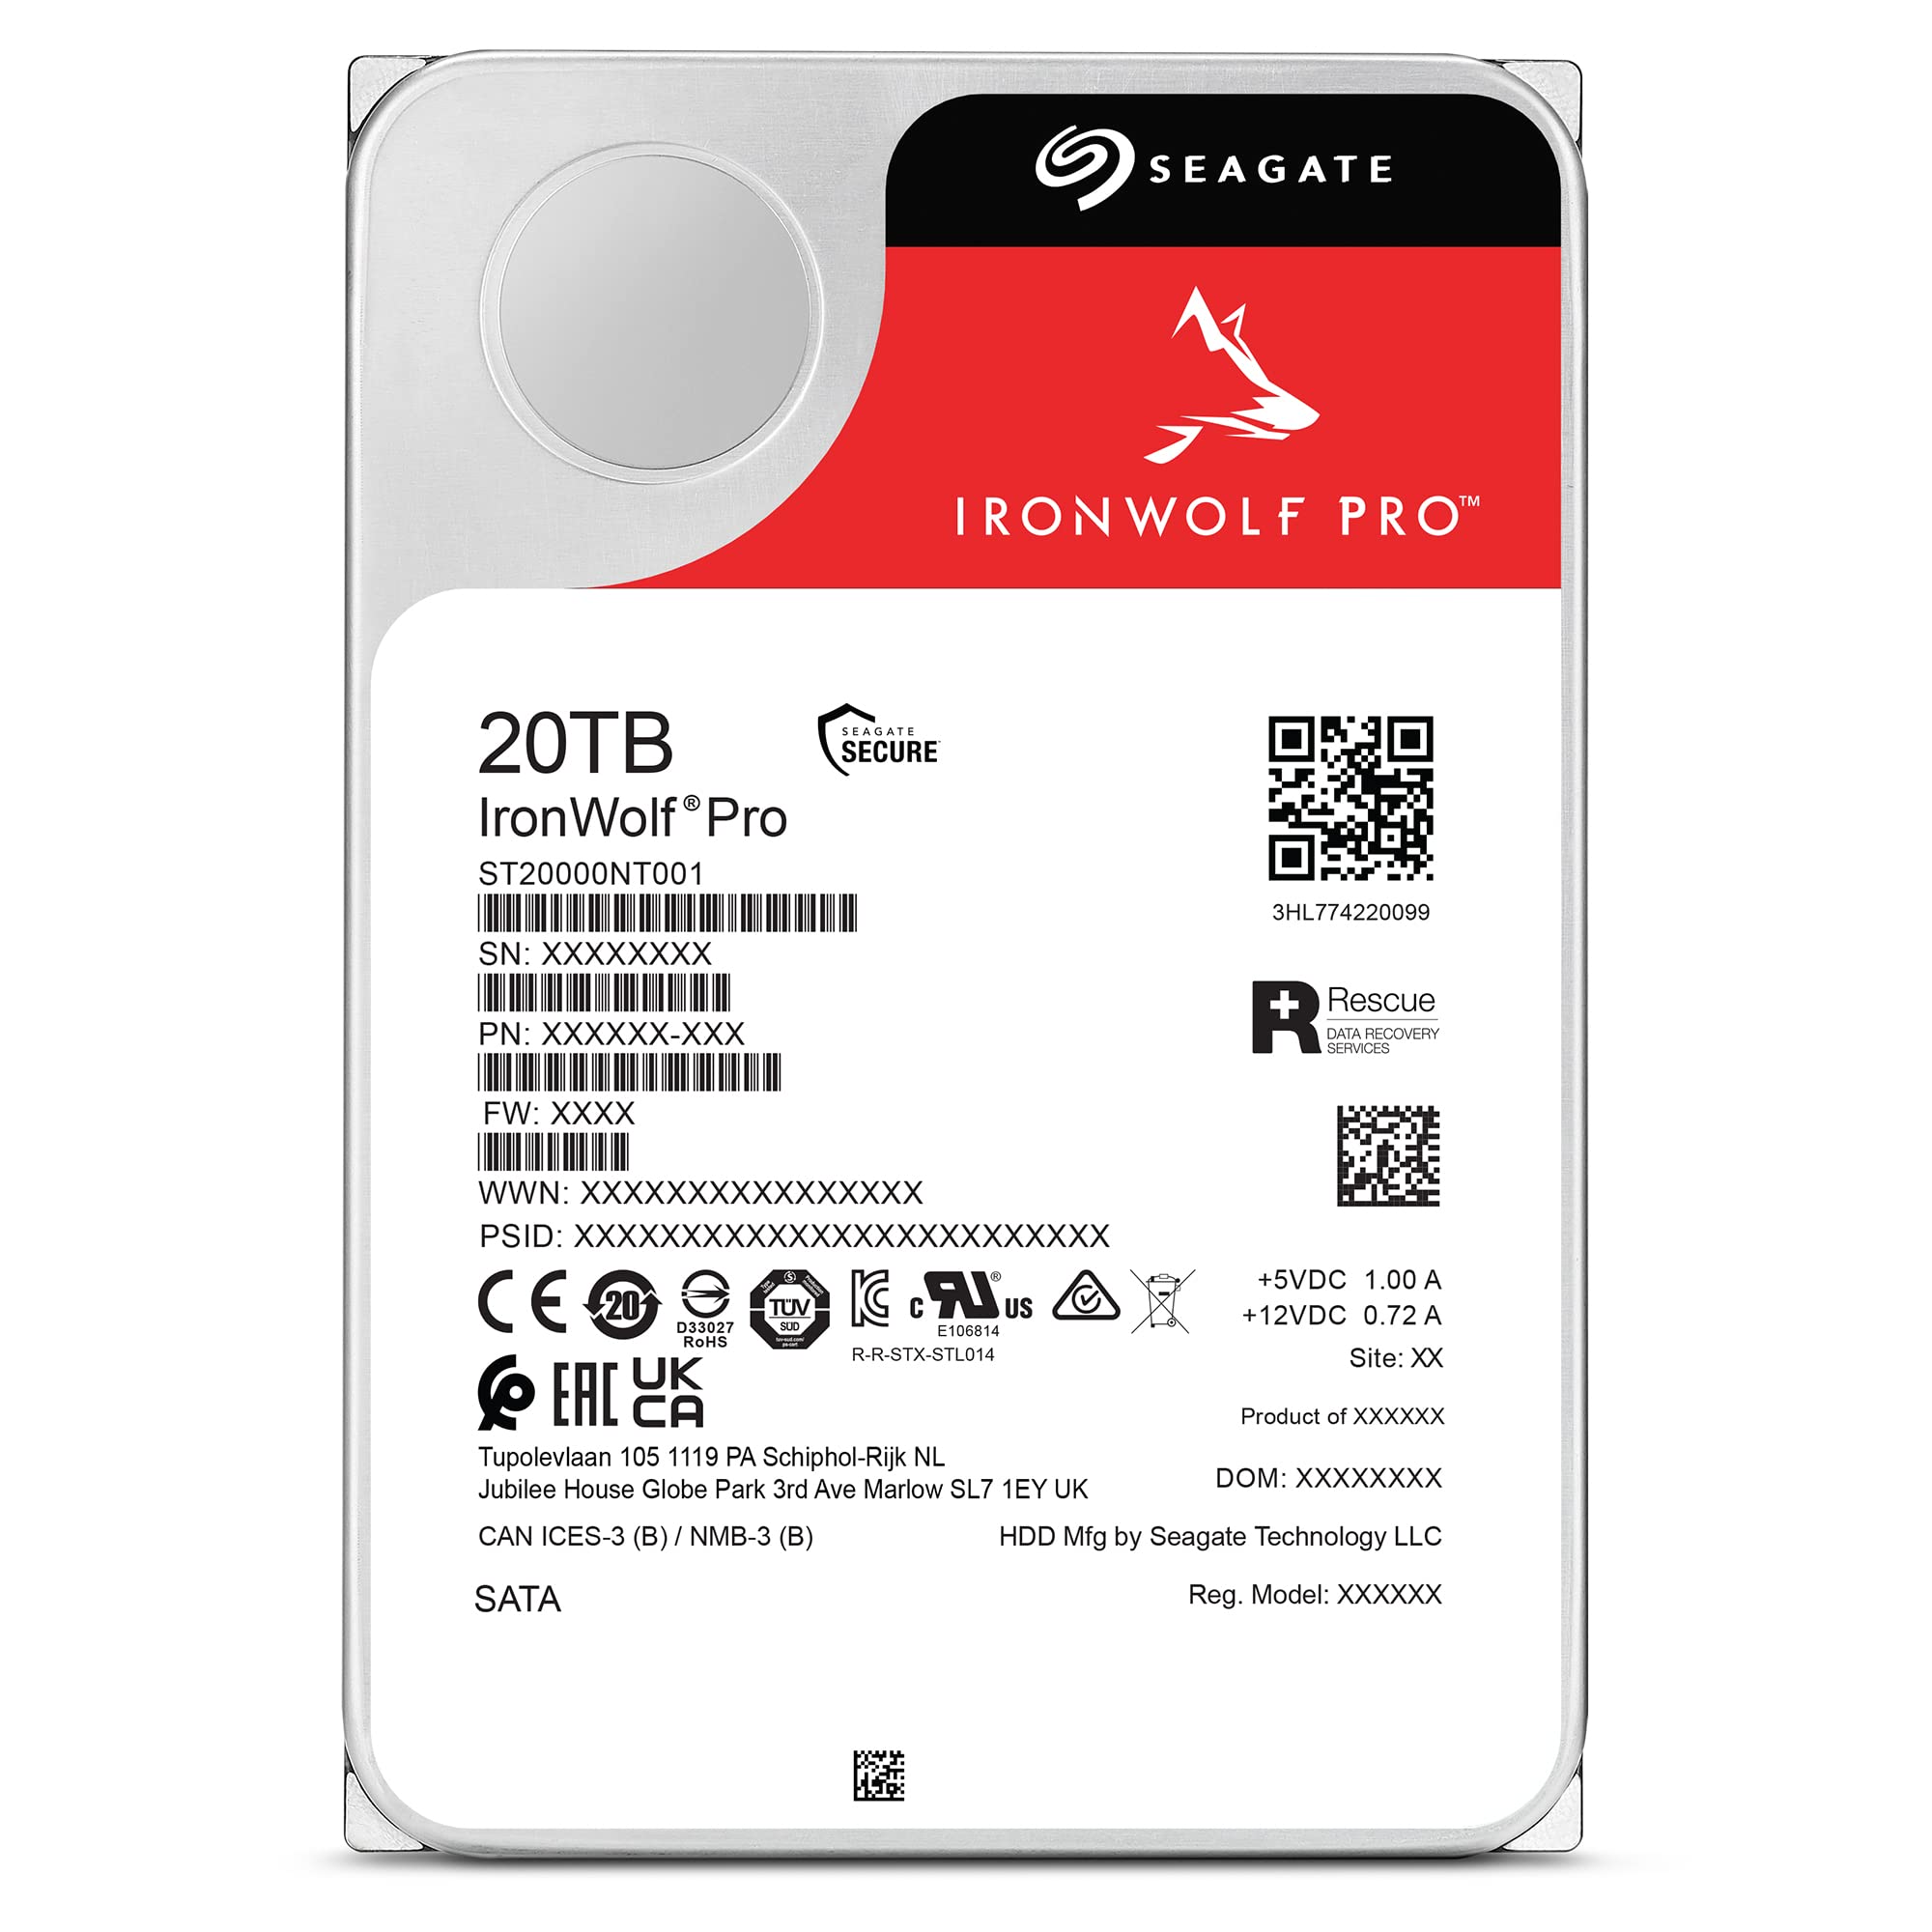 Seagate IronWolf Pro 20TB NAS Internal Hard Drive HDD – CMR 3.5 Inch SATA 6Gb/s 7200 RPM 256MB Cache for RAID Network Attached Storage, Rescue Services – Frustration Free Packaging(ST20000NEZ00)